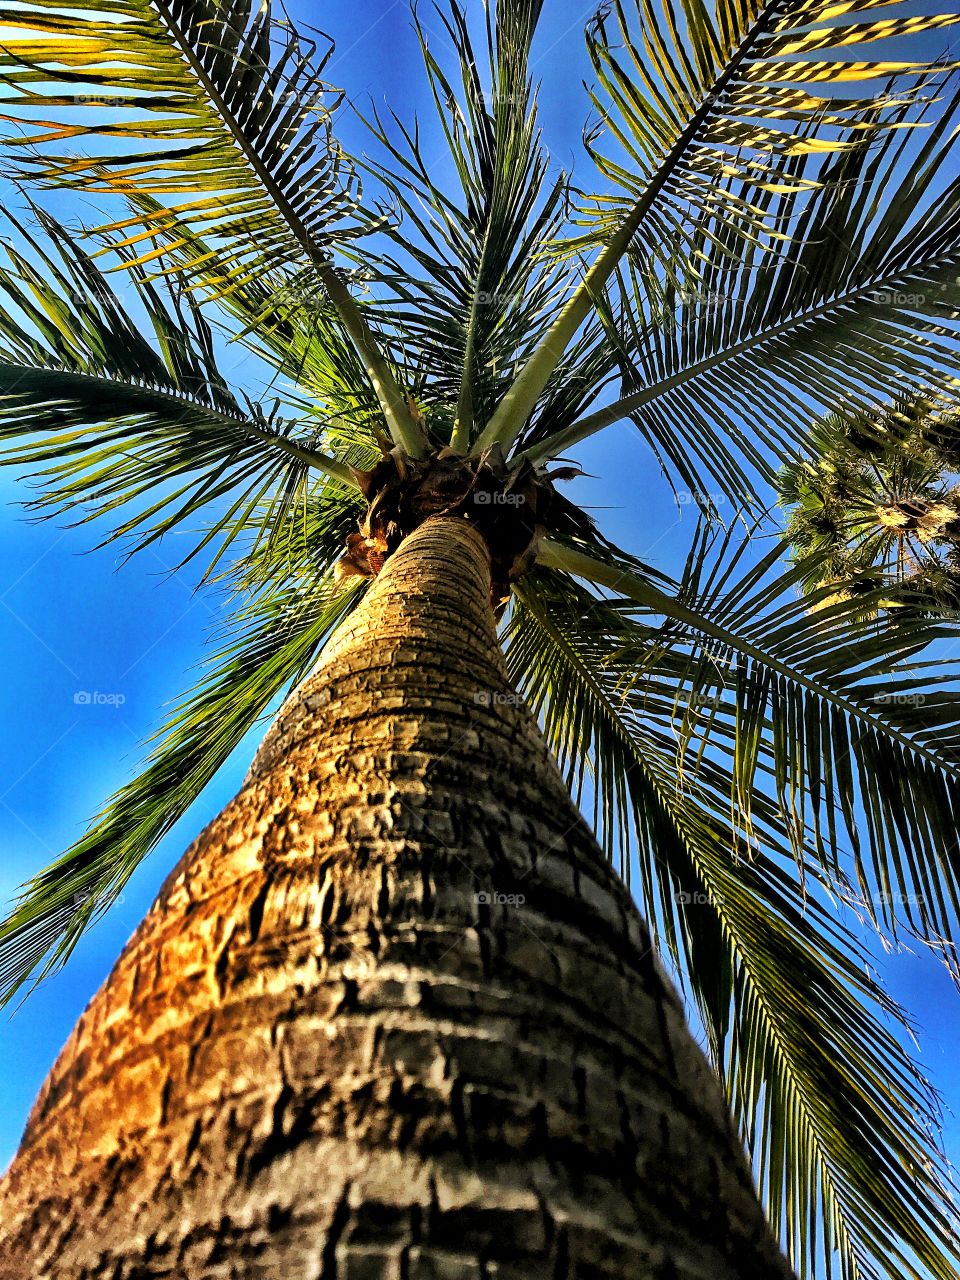 Palm tree from the trunk with a blue background sky